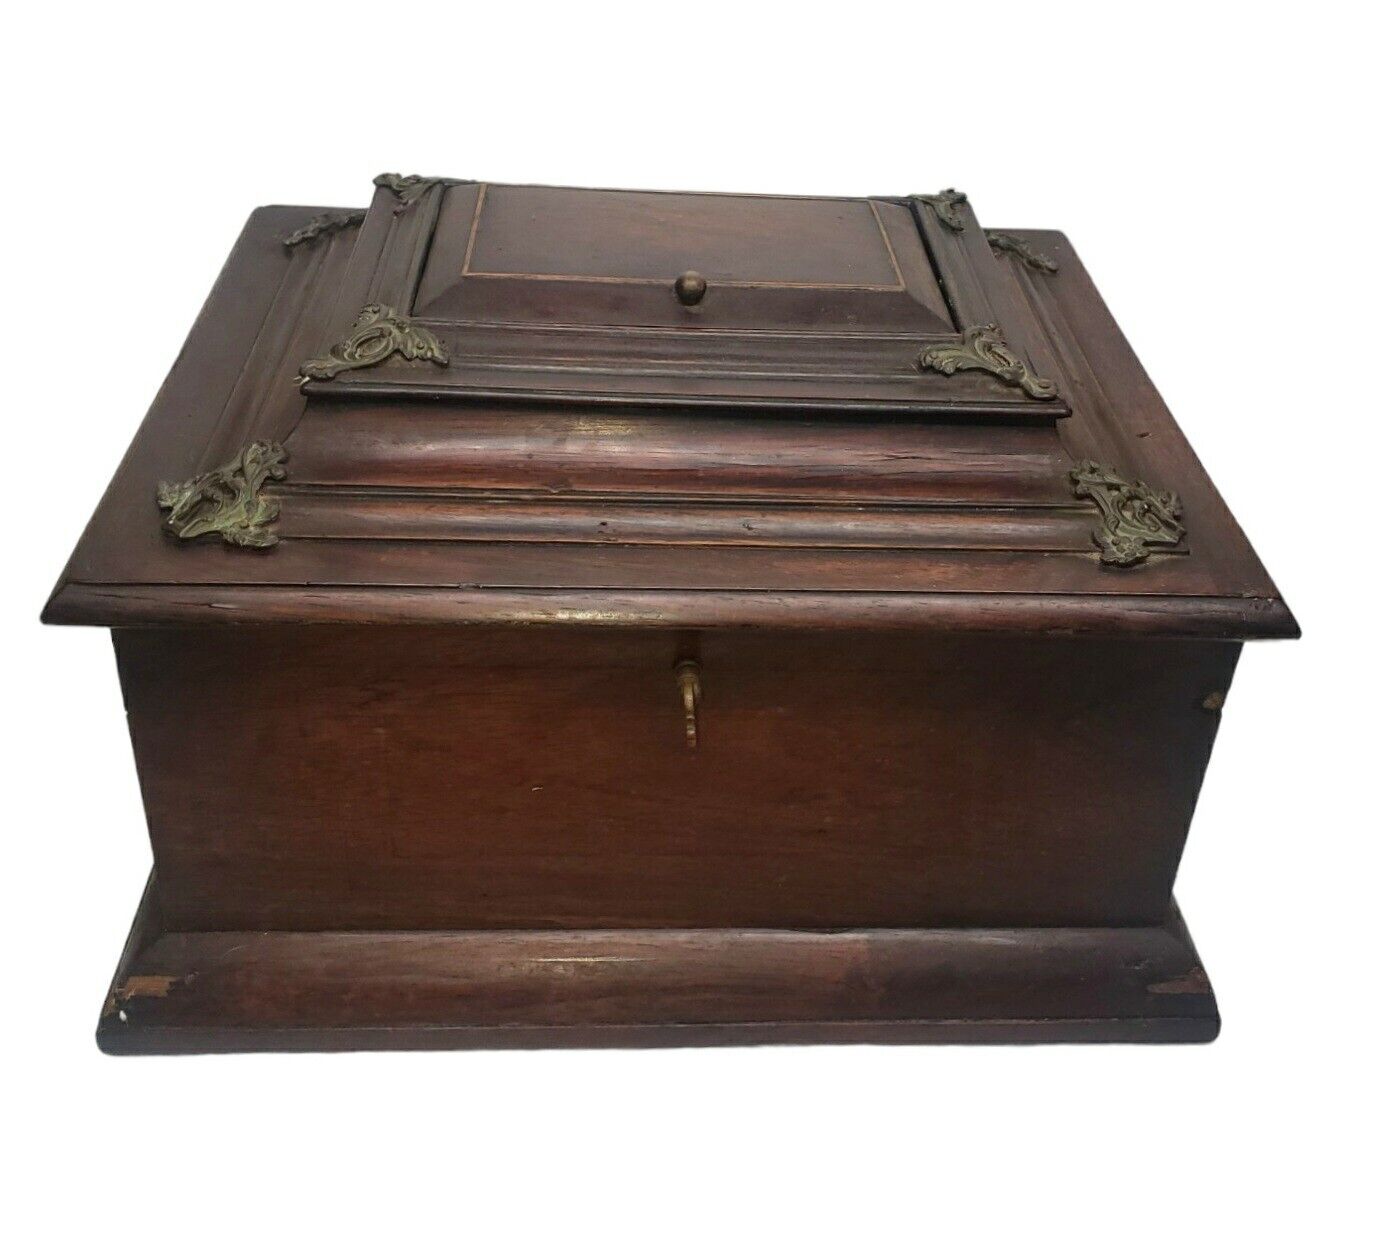 Antique Wooden Treasure Chest Box Rare With A Hinged Lidded Top Door With Key